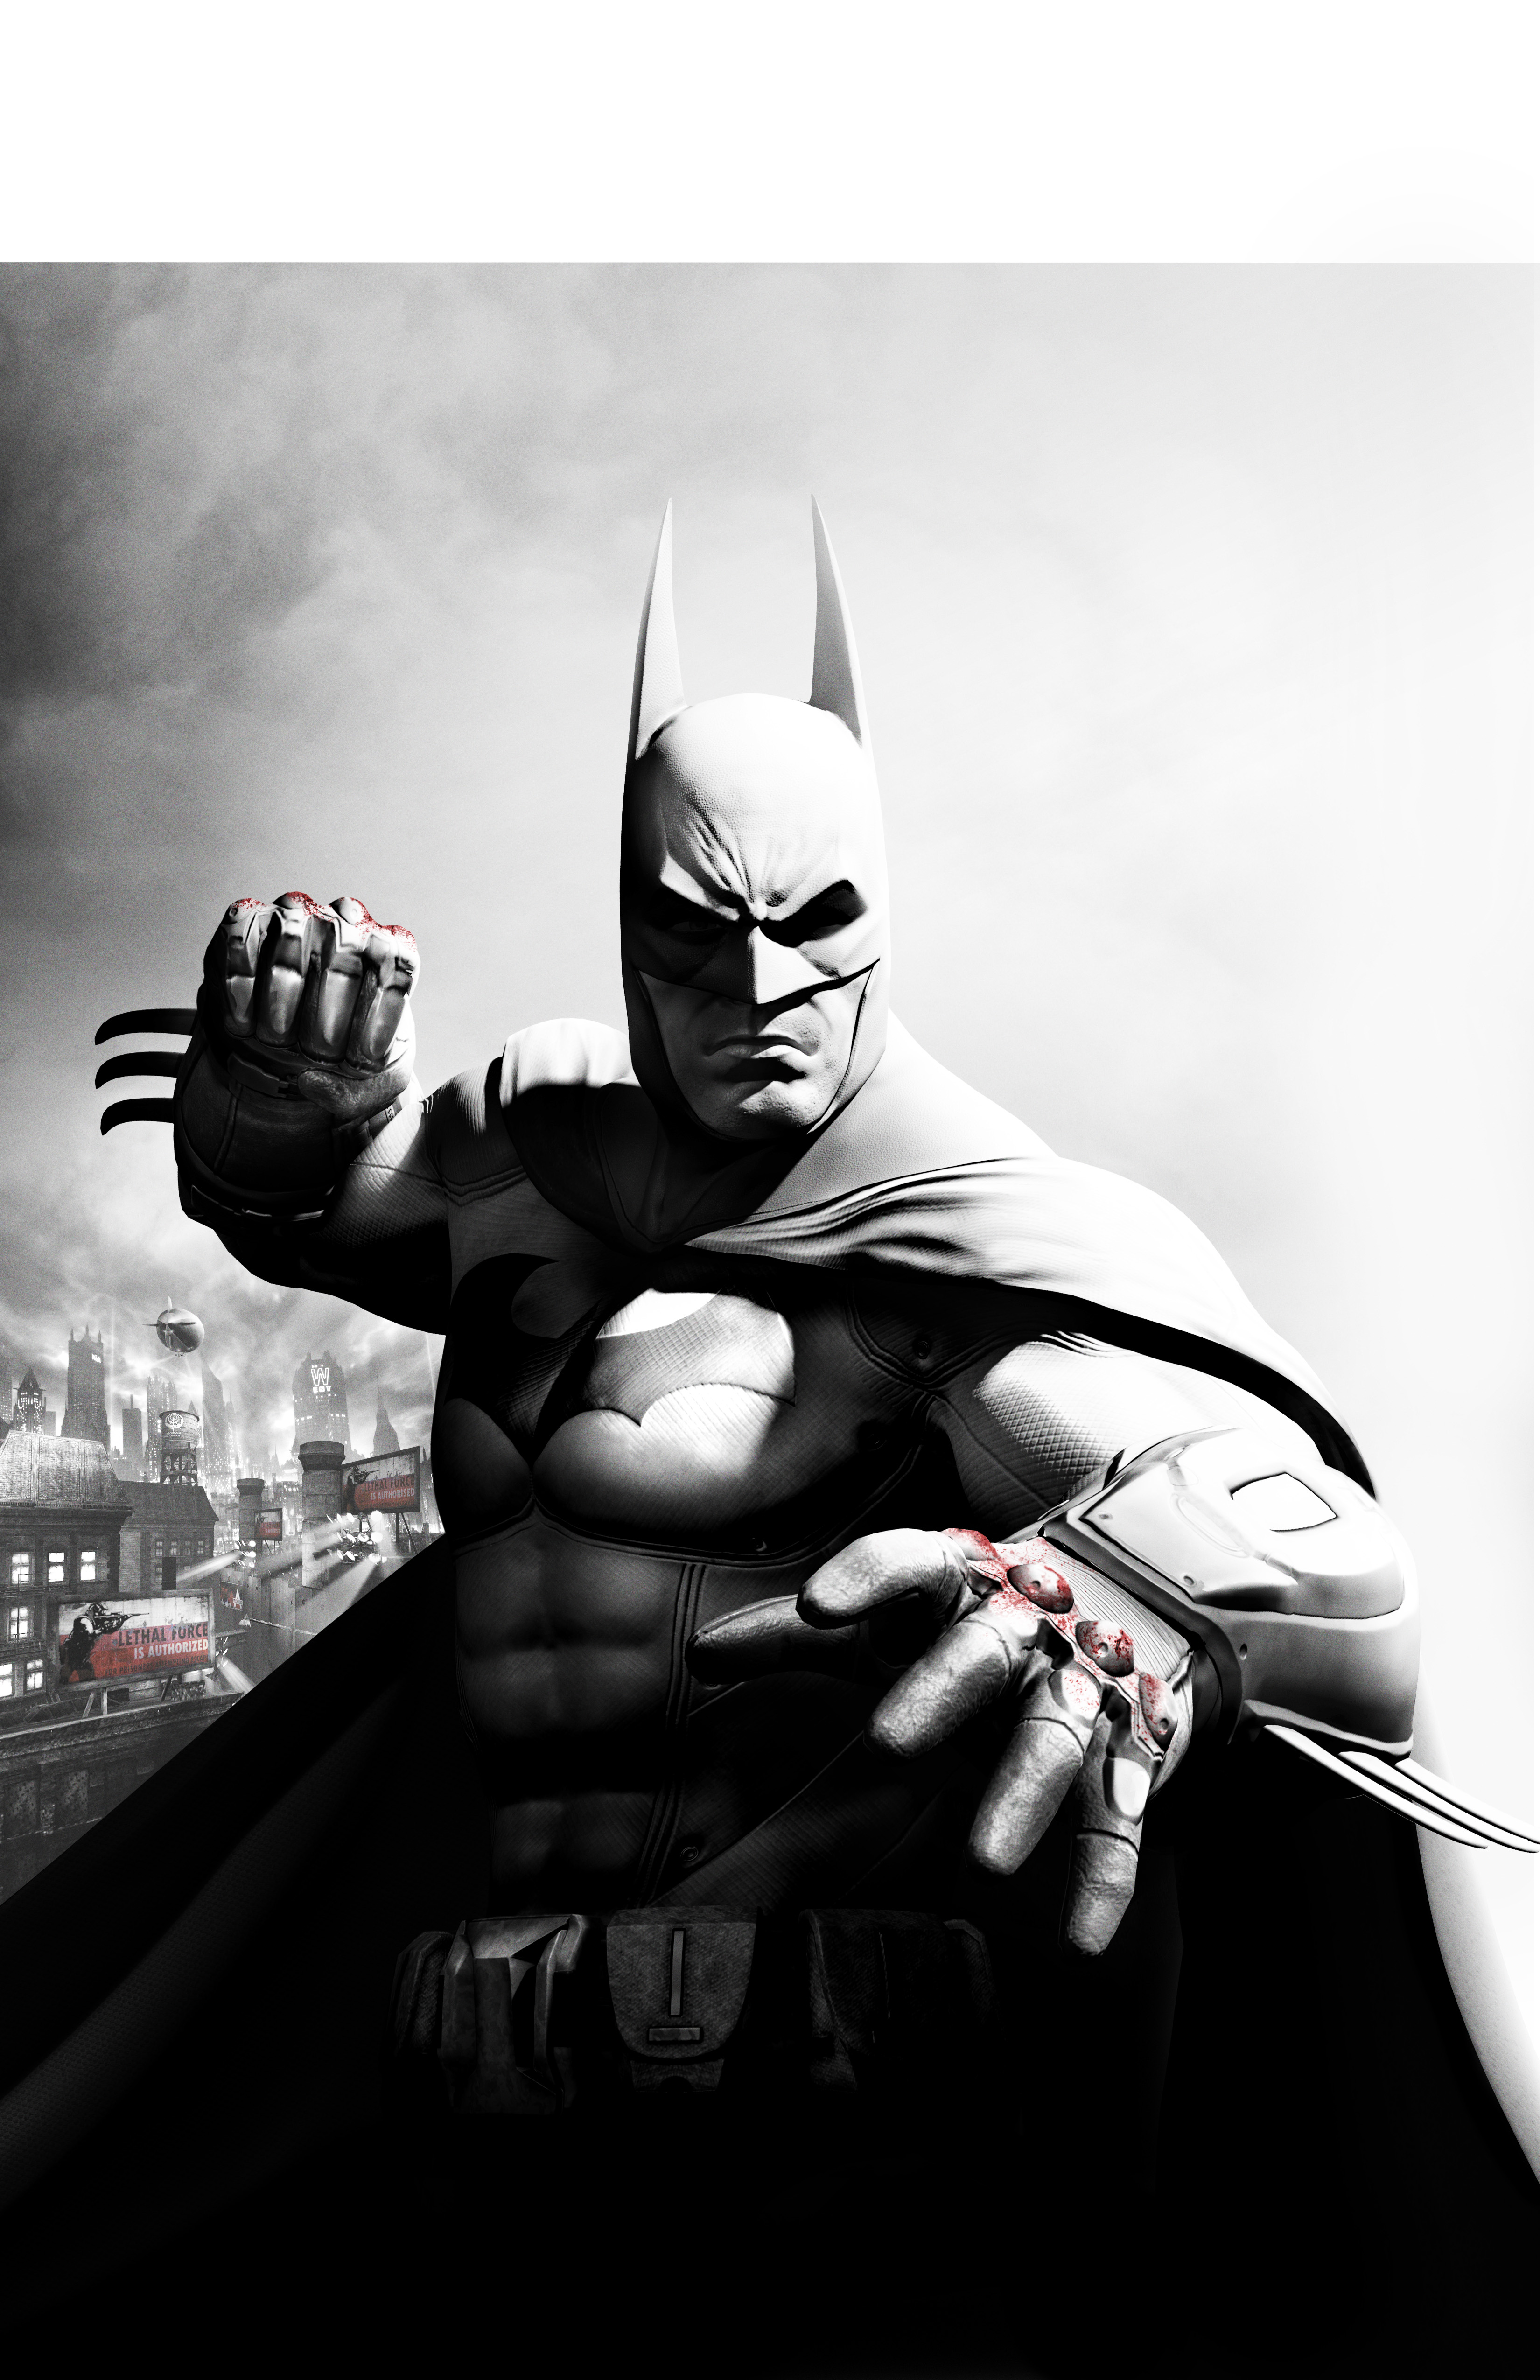 Comic-Images » Batman with bloody knuckles